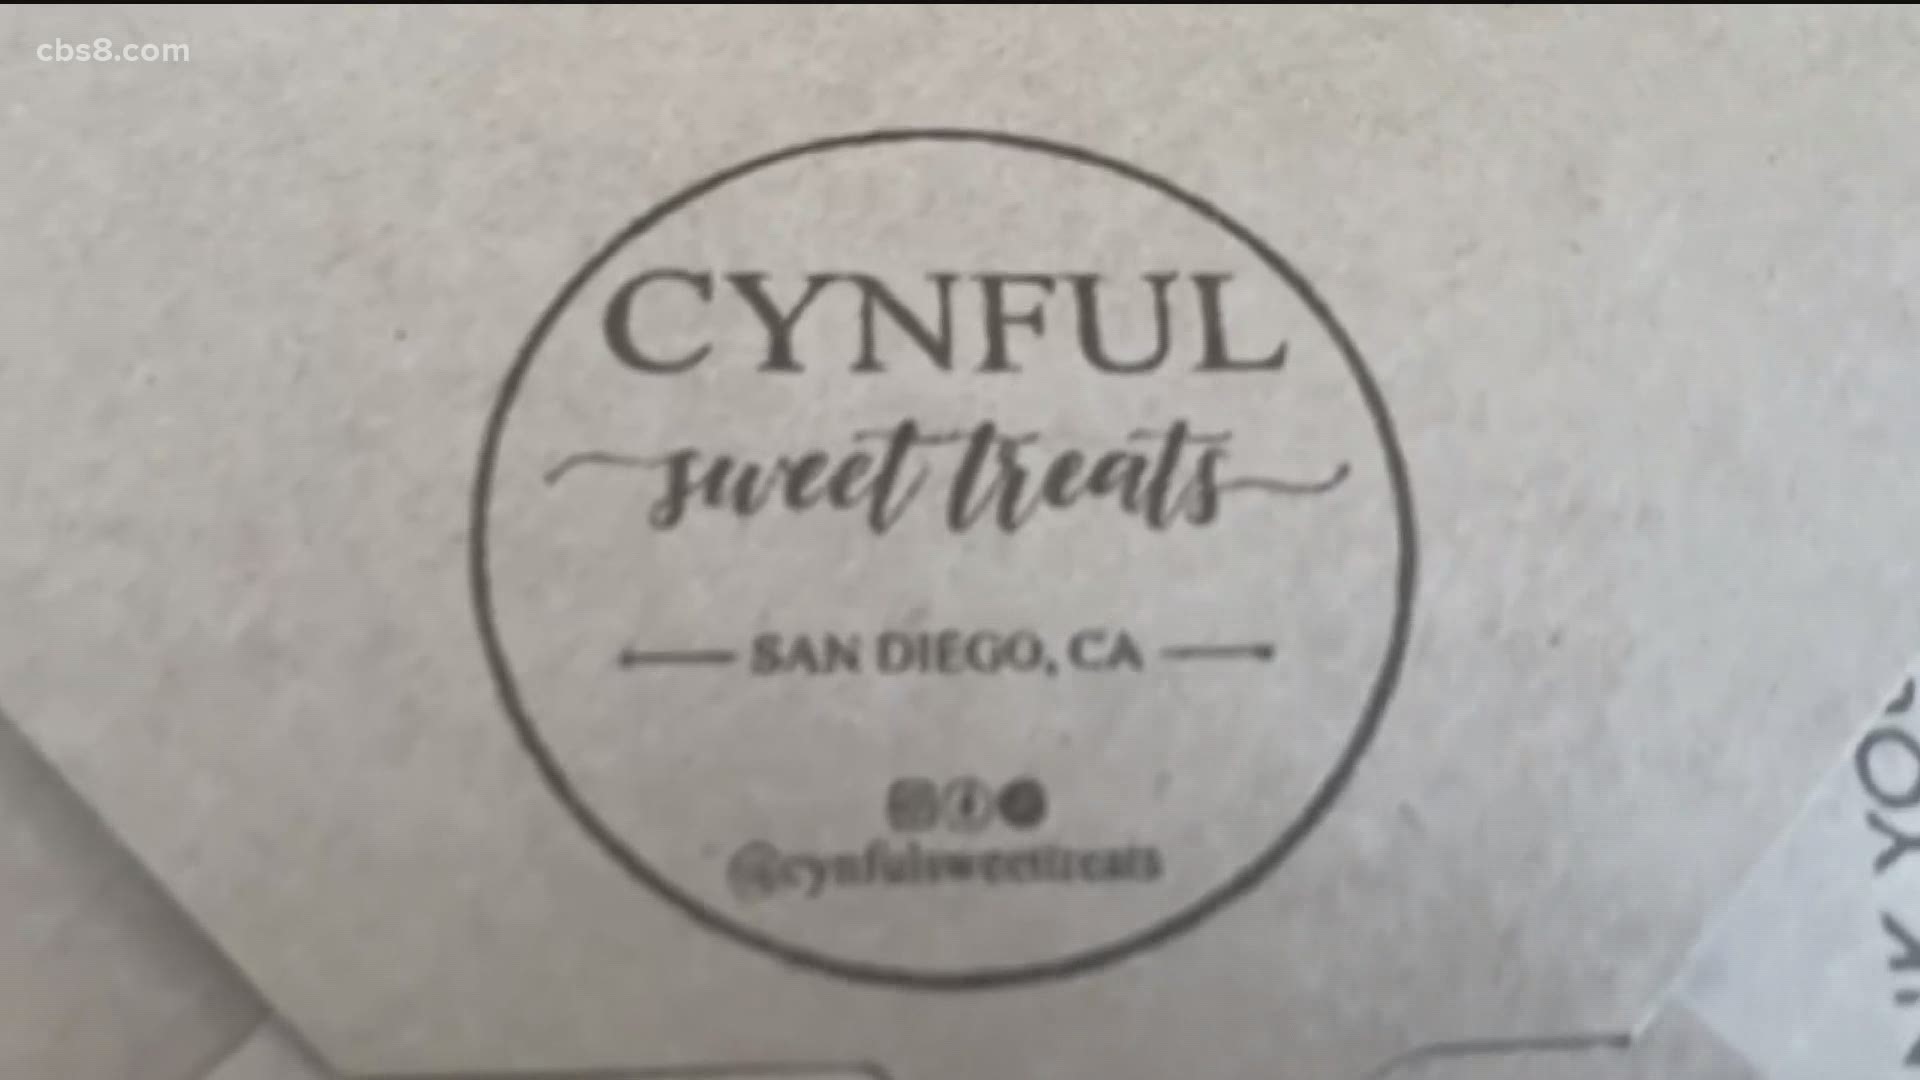 This San Diego business serves up mochi donut holes made with sweet rice flour. Find out more at @cynfulsweettreats on Facebook and Instagram.